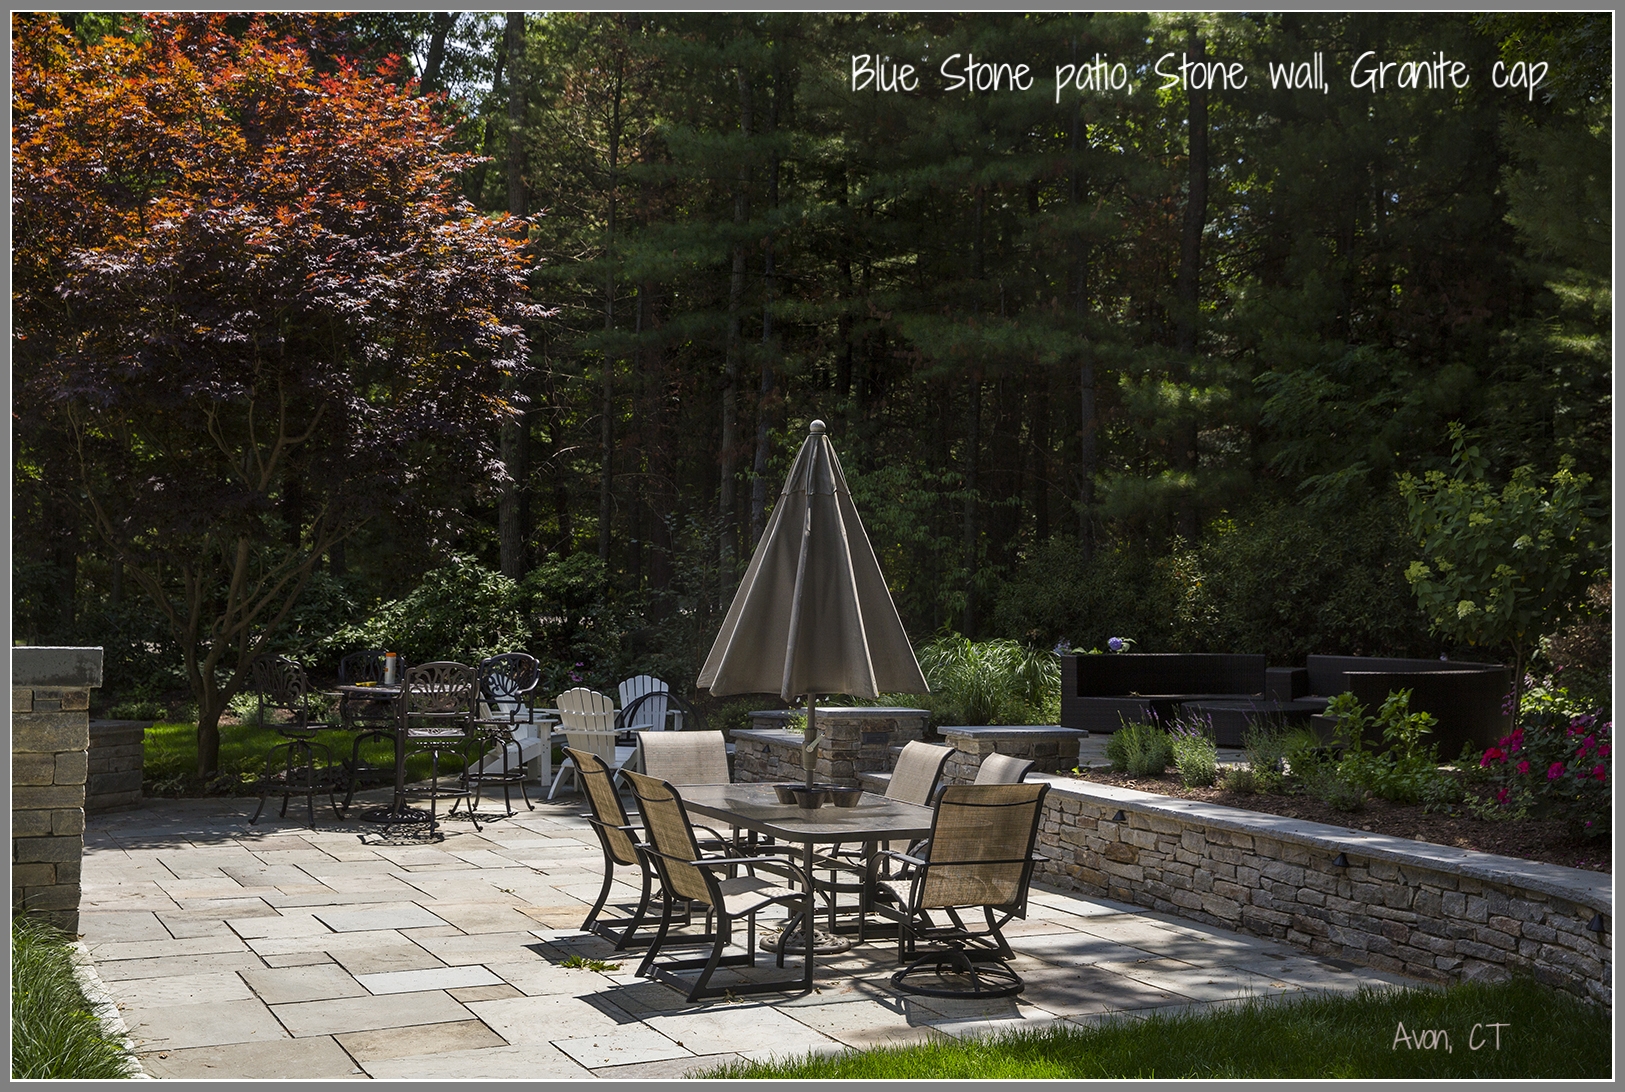 Blue stone patio and stone wall